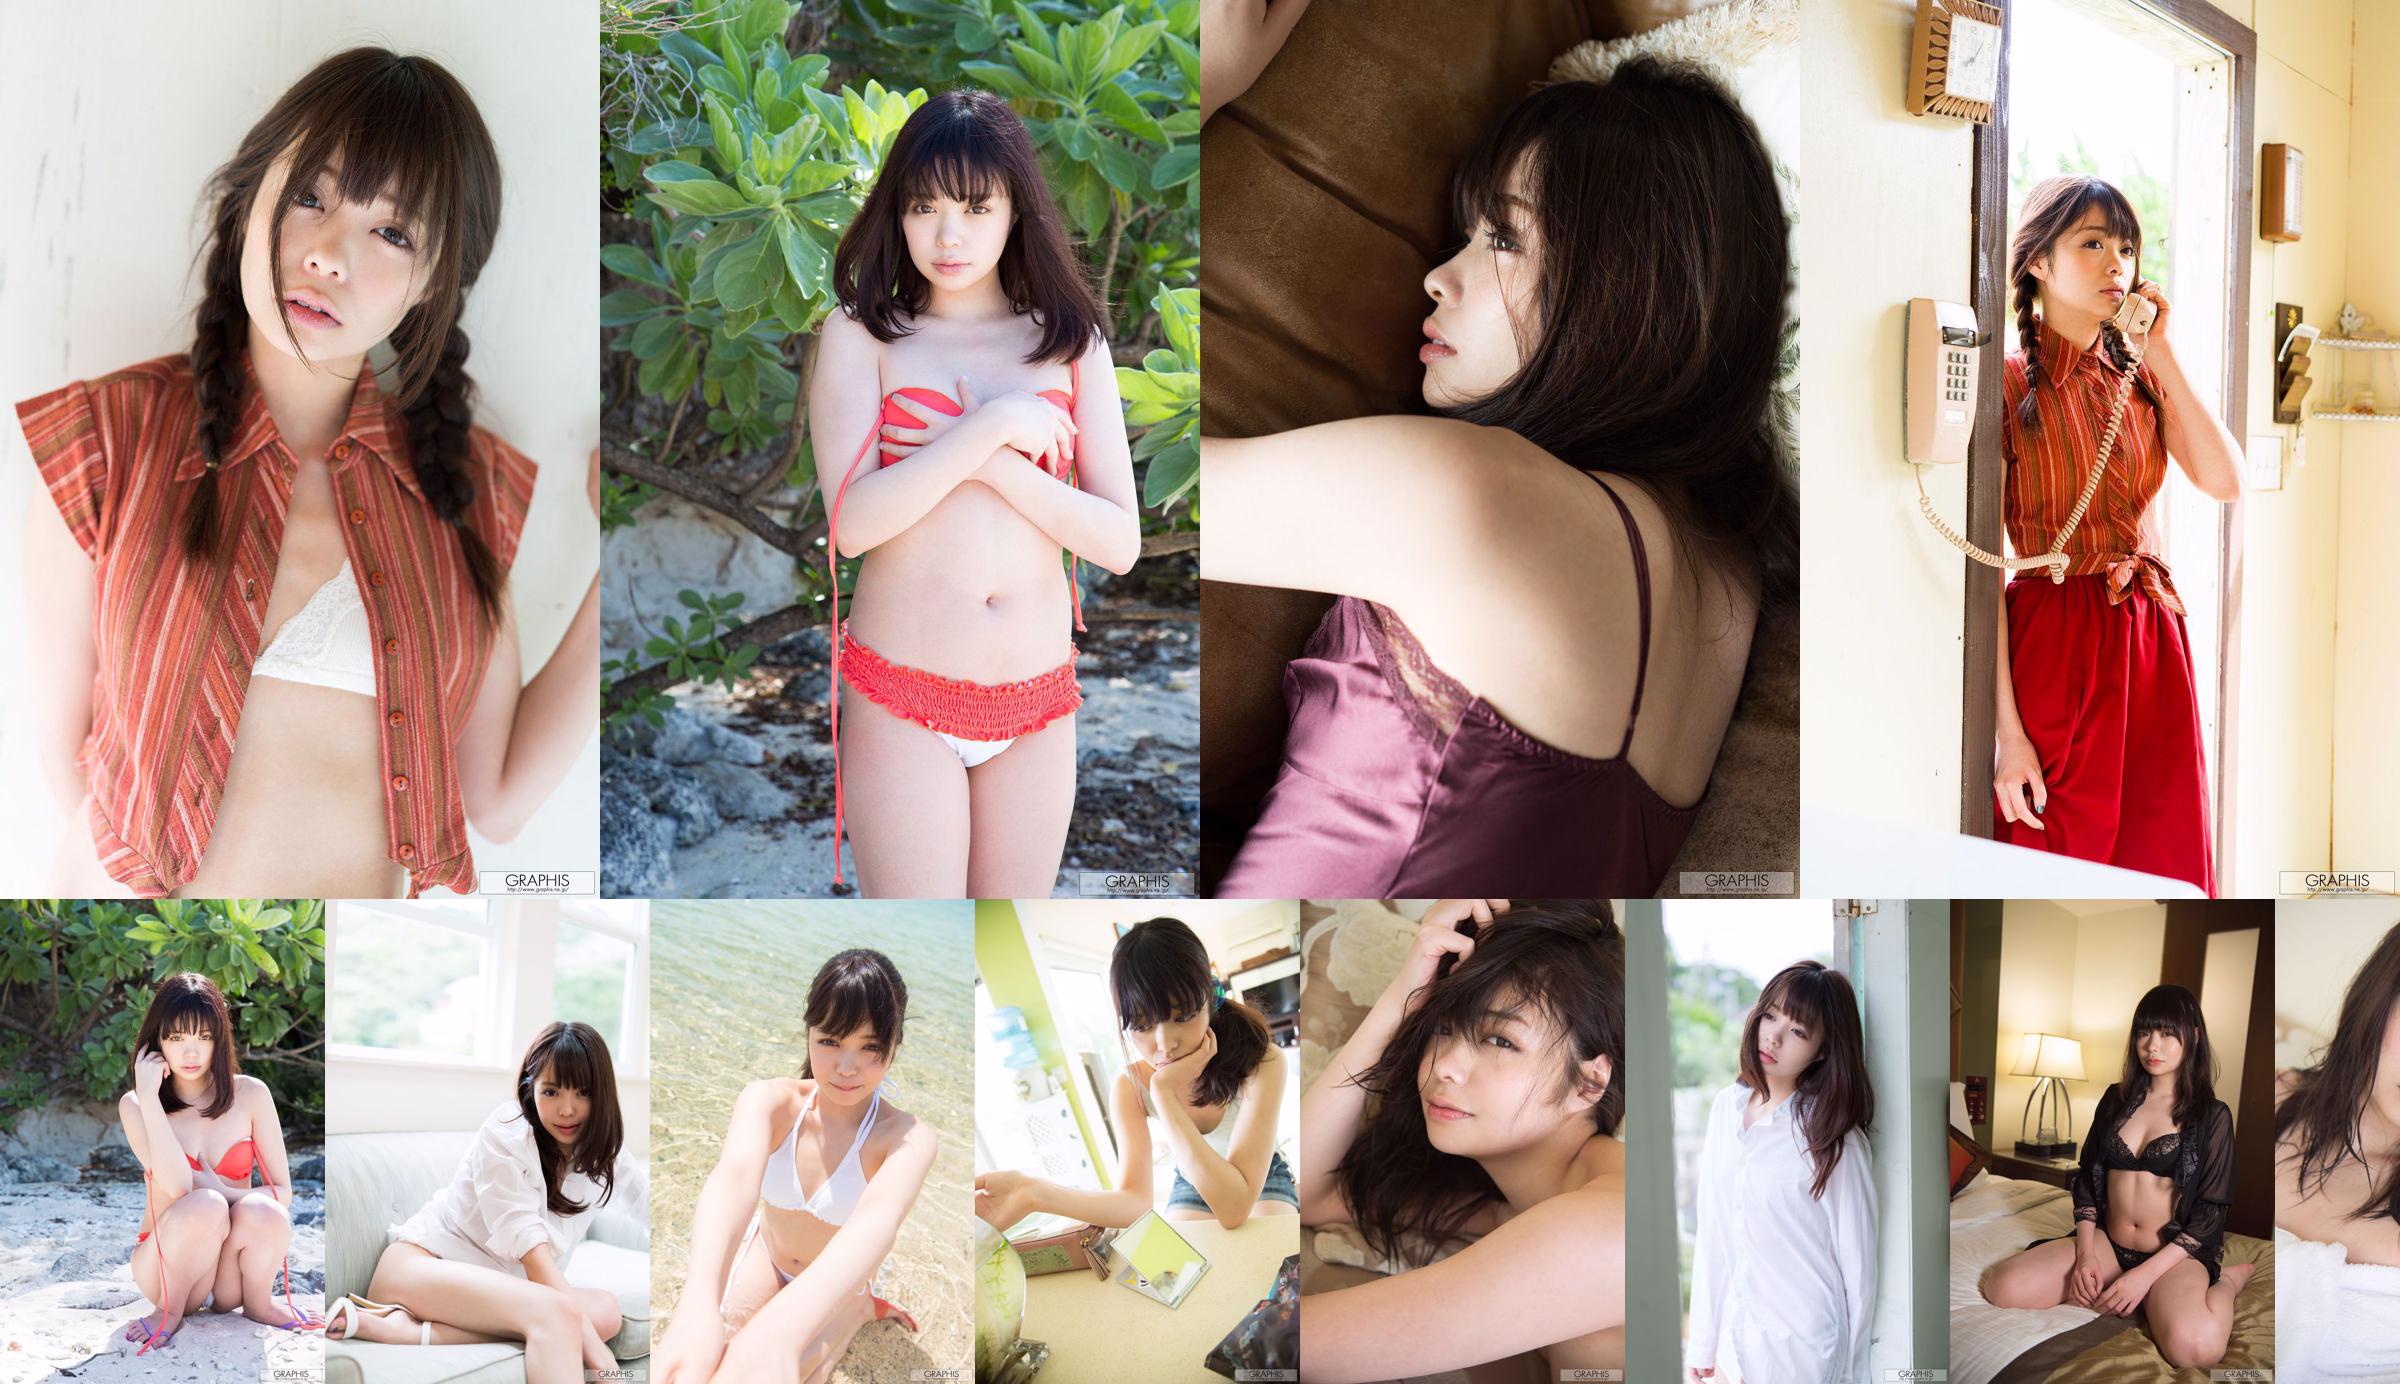 Kaname Otori "lovely doll" [Graphis] Gals No.4e415a Page 4